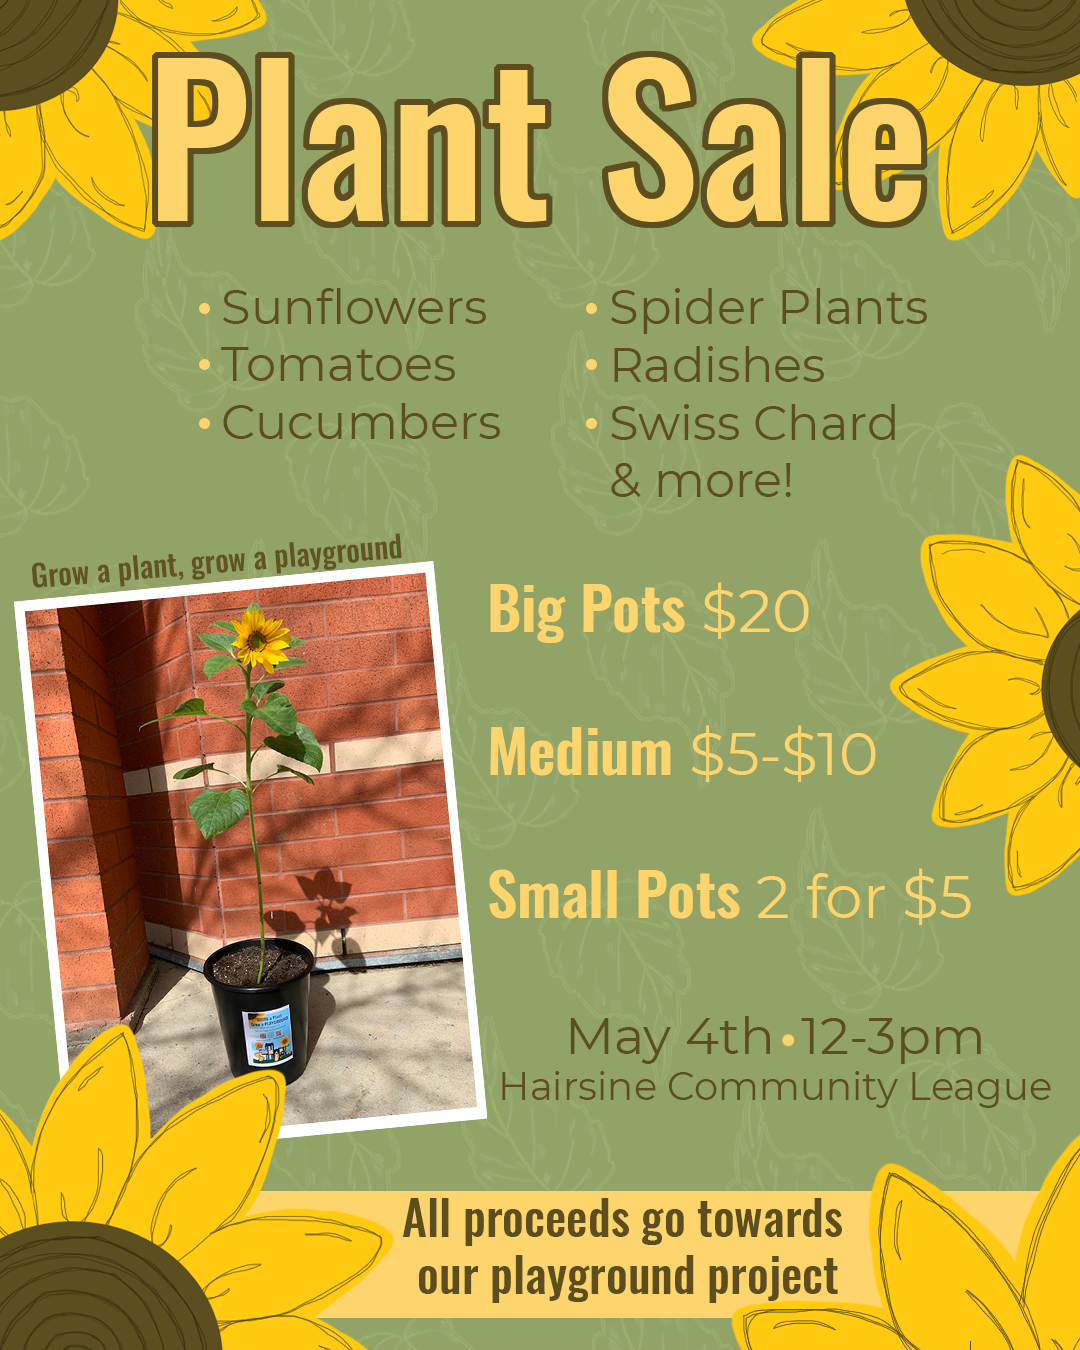 Plant Sale May 4th 12-3pm Big Pots $20 Medium $5-$10 and Small Pots 2 for $5